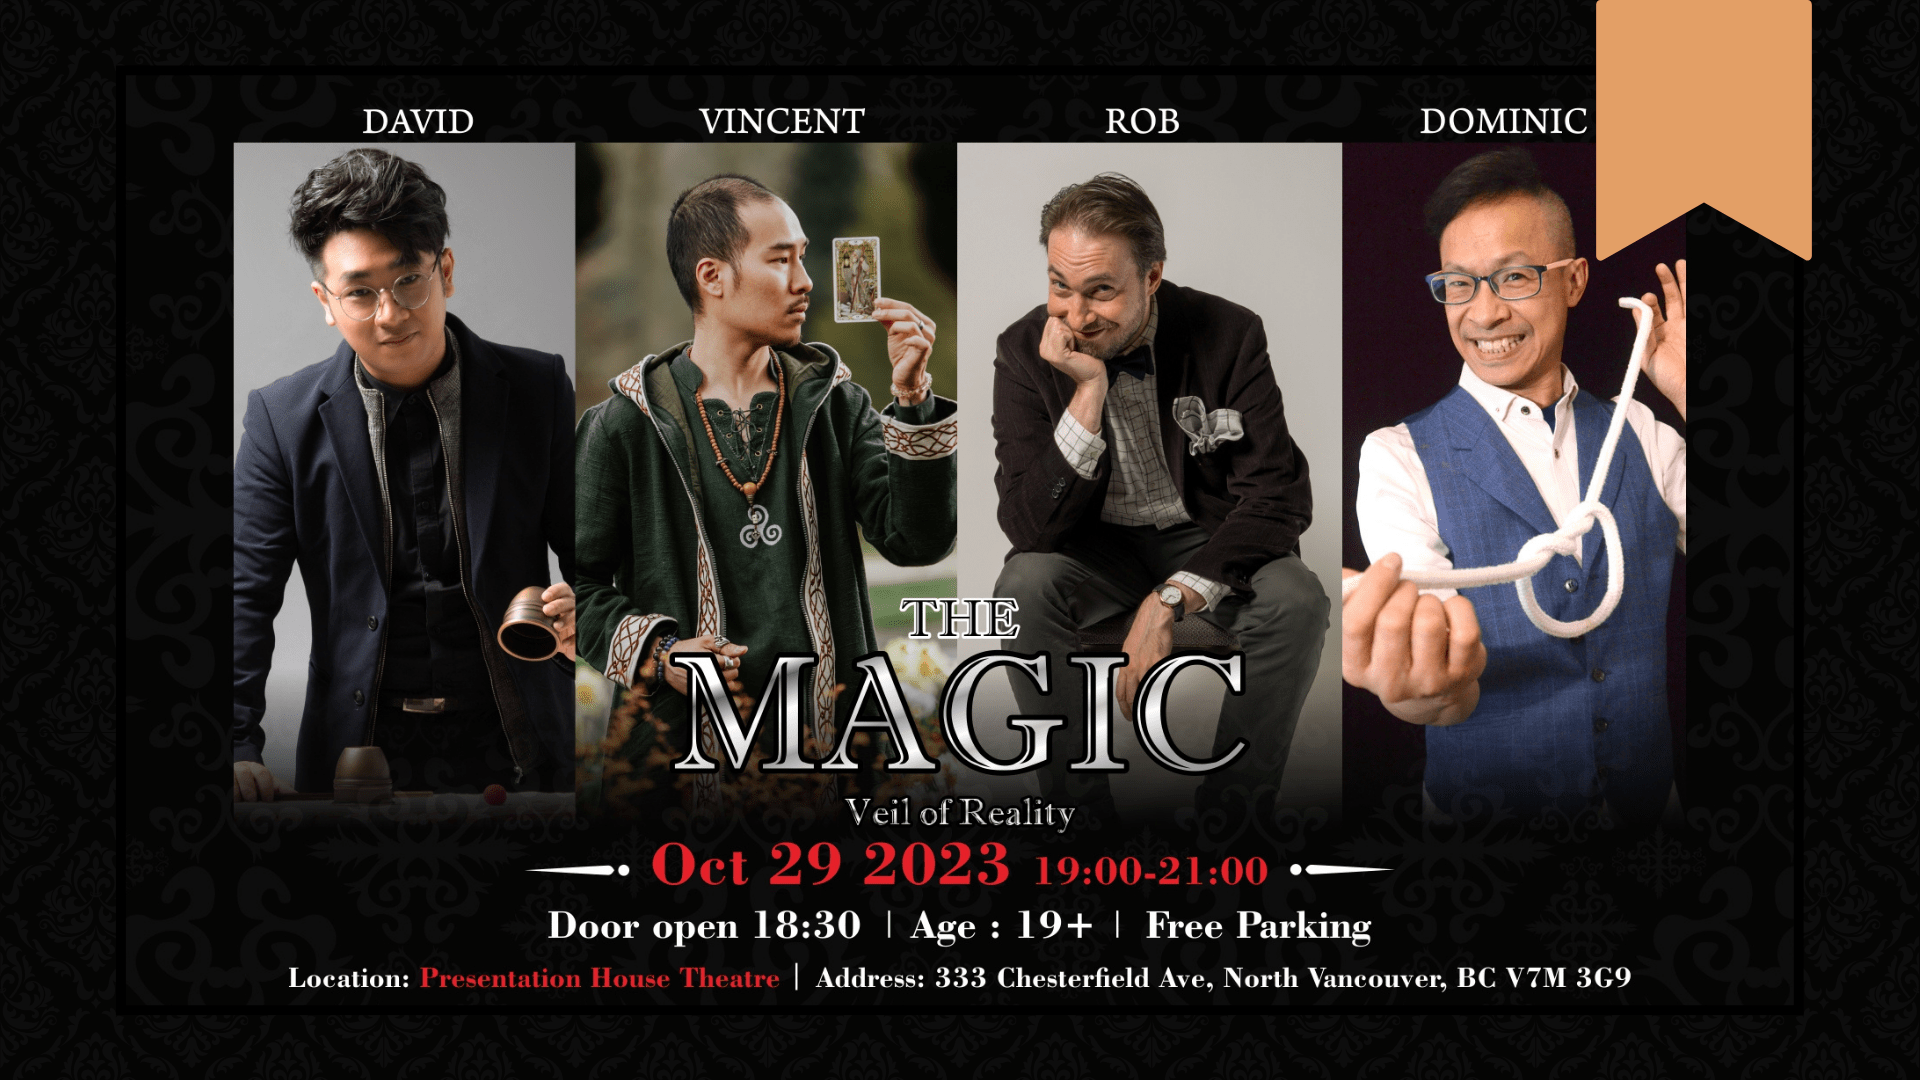 "The Magic Veil of Reality" banner images with four magicians from left to right: David, Vincent, Rob, and Dominic. "Oct. 29, 2023 from 7:00 to 9:00 PM". "Doors open at 6:30". "Age: 19+". "Free Parking". "Location: Presentation House Theatre." "Address: 333 Chesterfield Ave, North Vancouver, BC V7M 3G9".